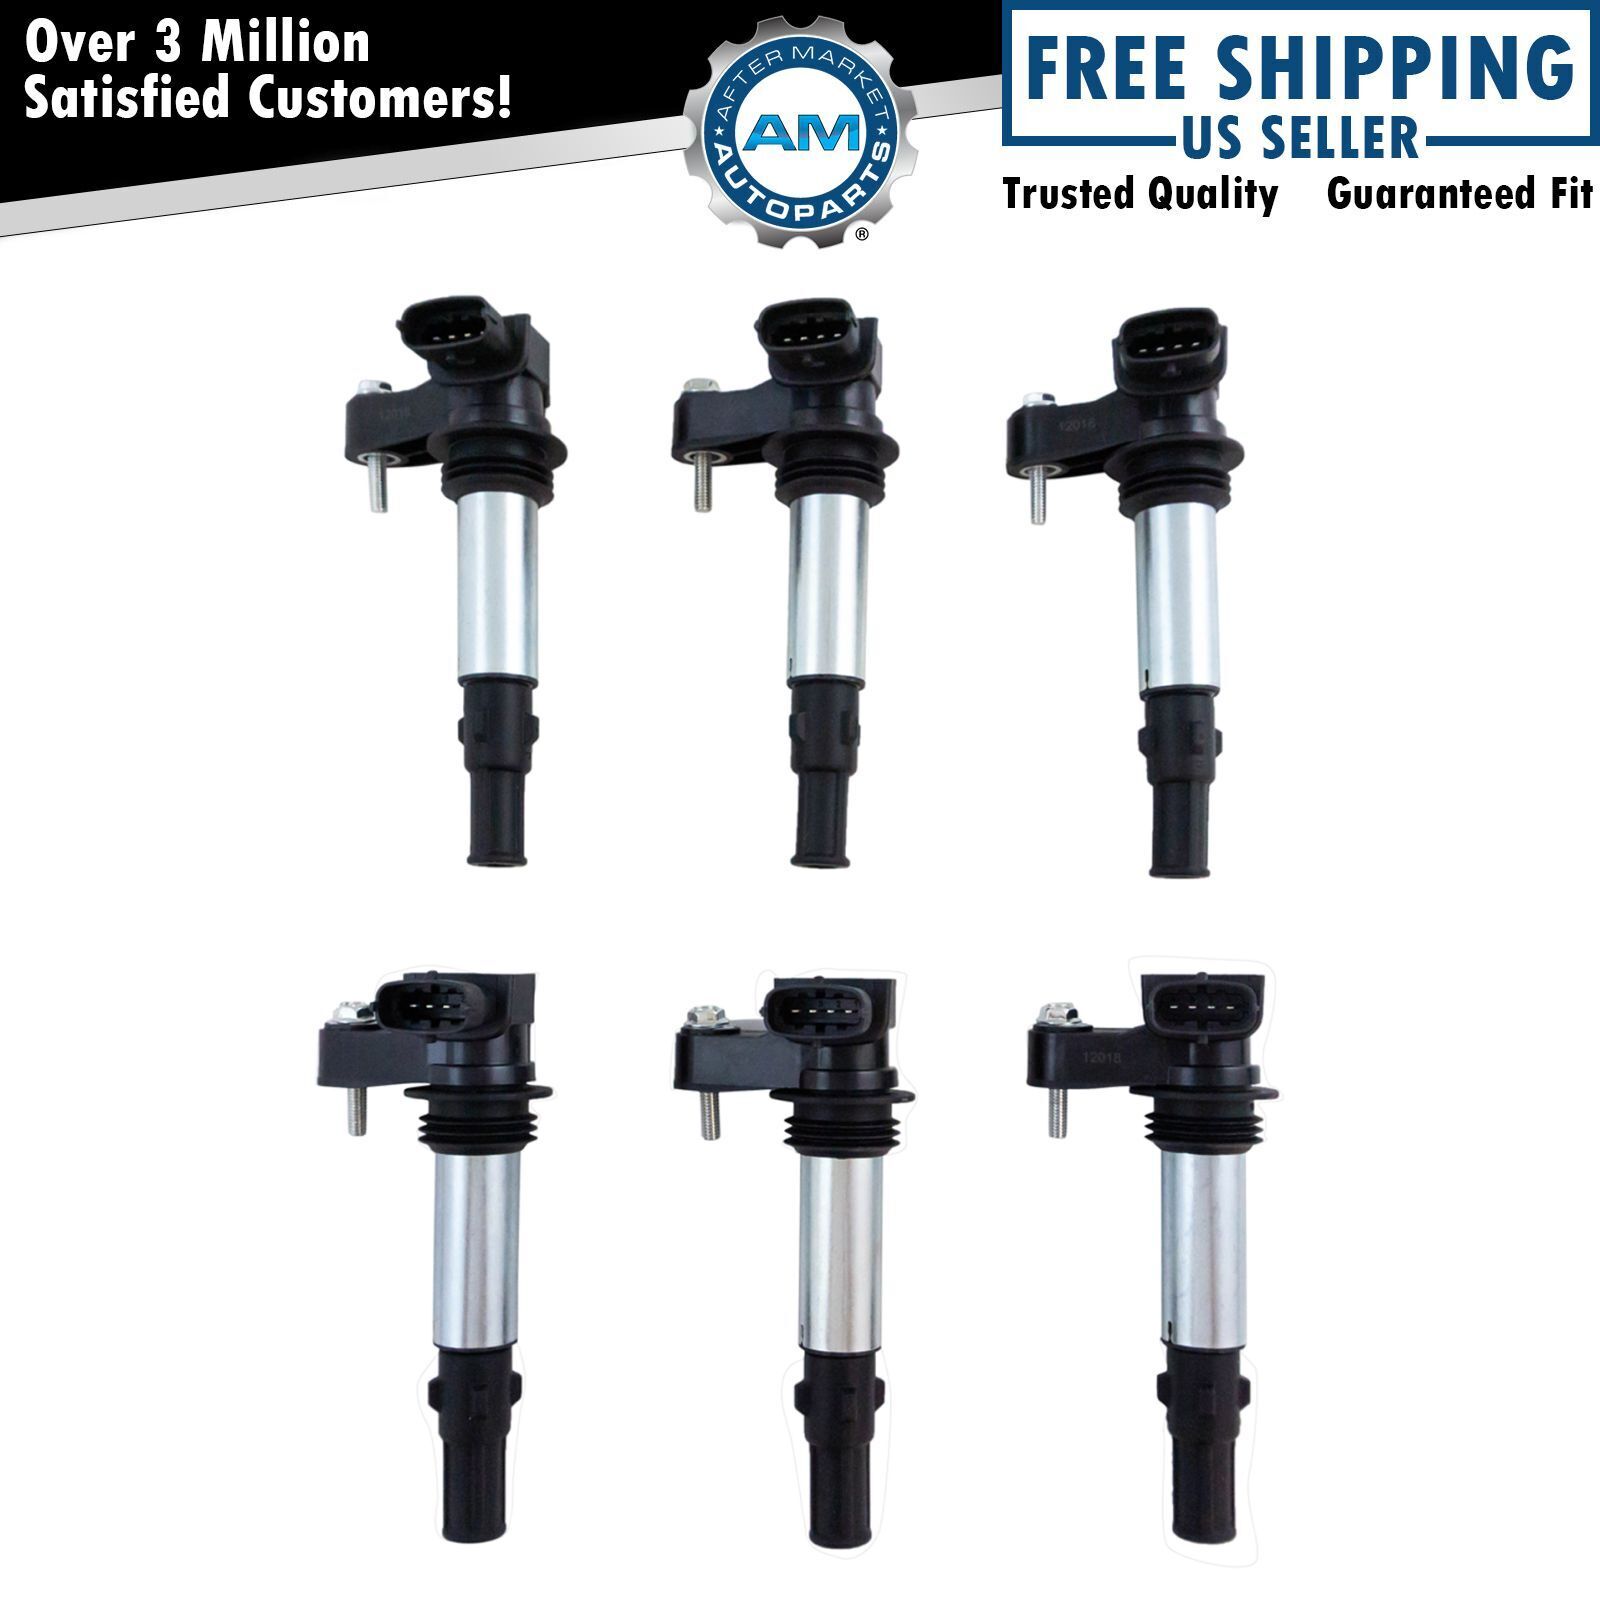 Ignition Coil Pack Kit Set of 6 For Traverse Allure Enclave Acadia CTS STS 3.6L